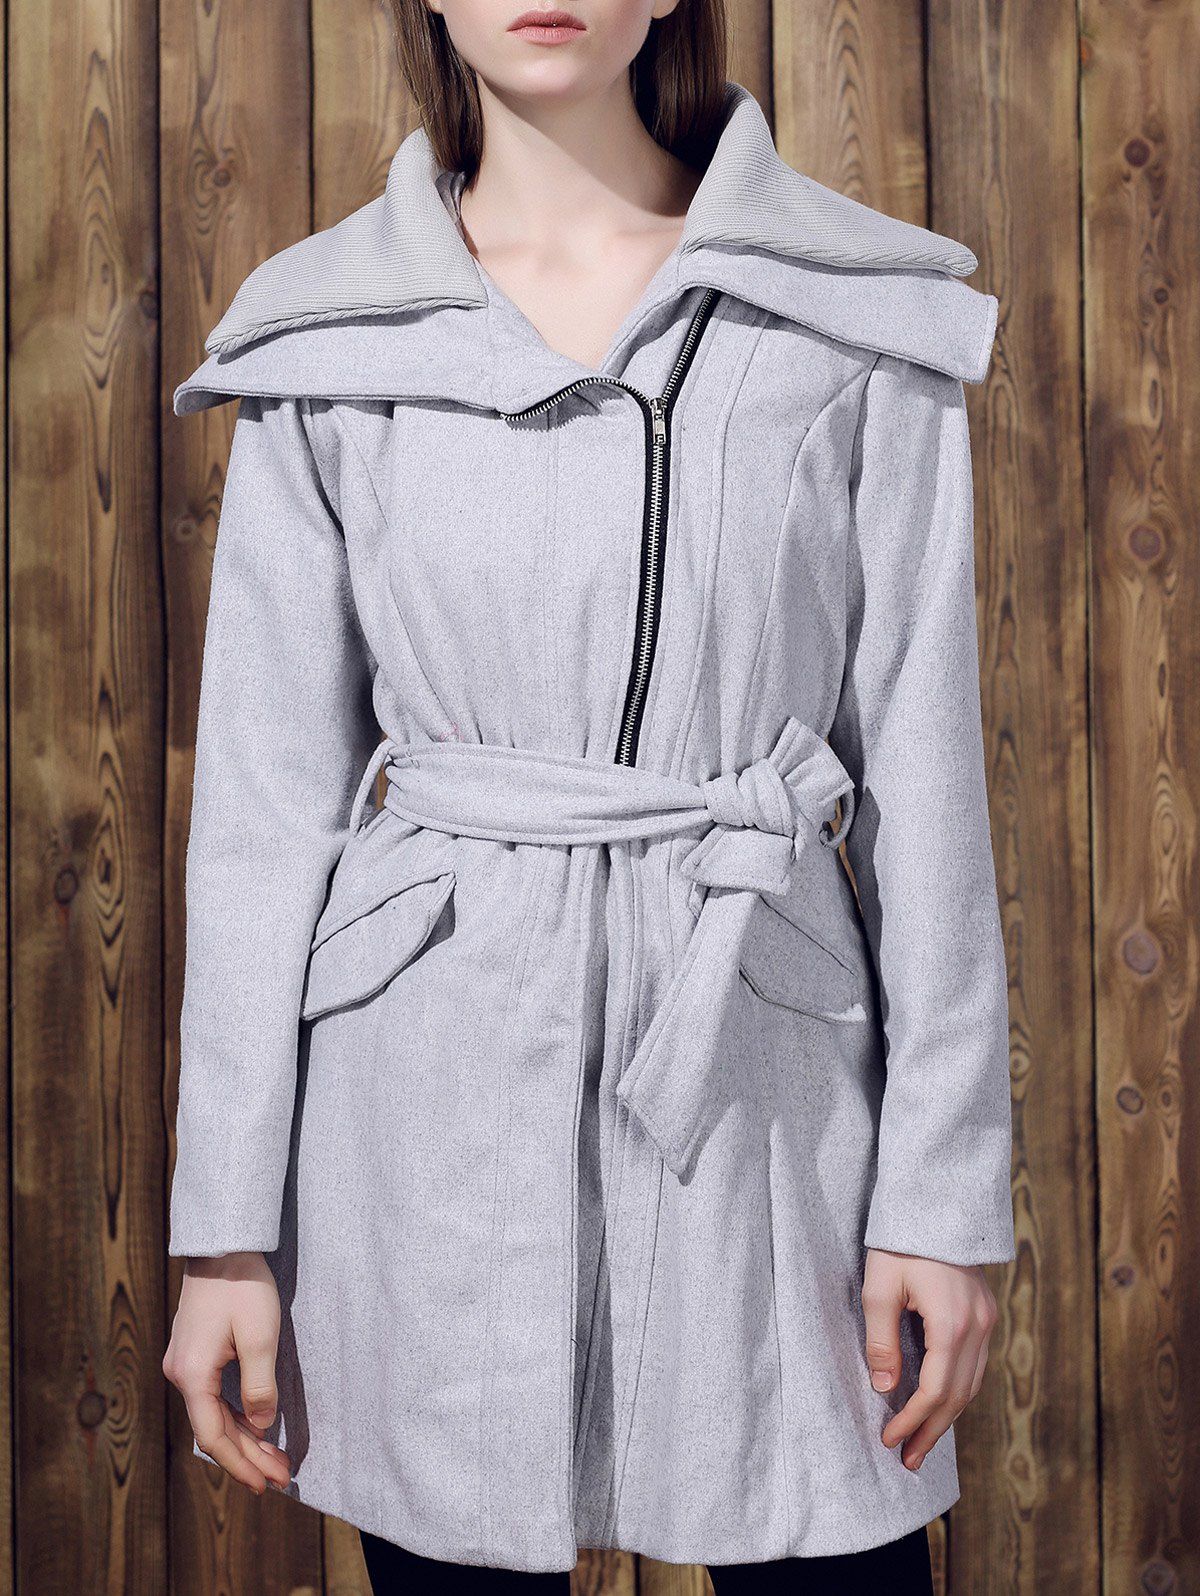 Stylish Long Sleeve Turn-Down Collar Spliced Zip Up Women's Belted Coat - GRAY L